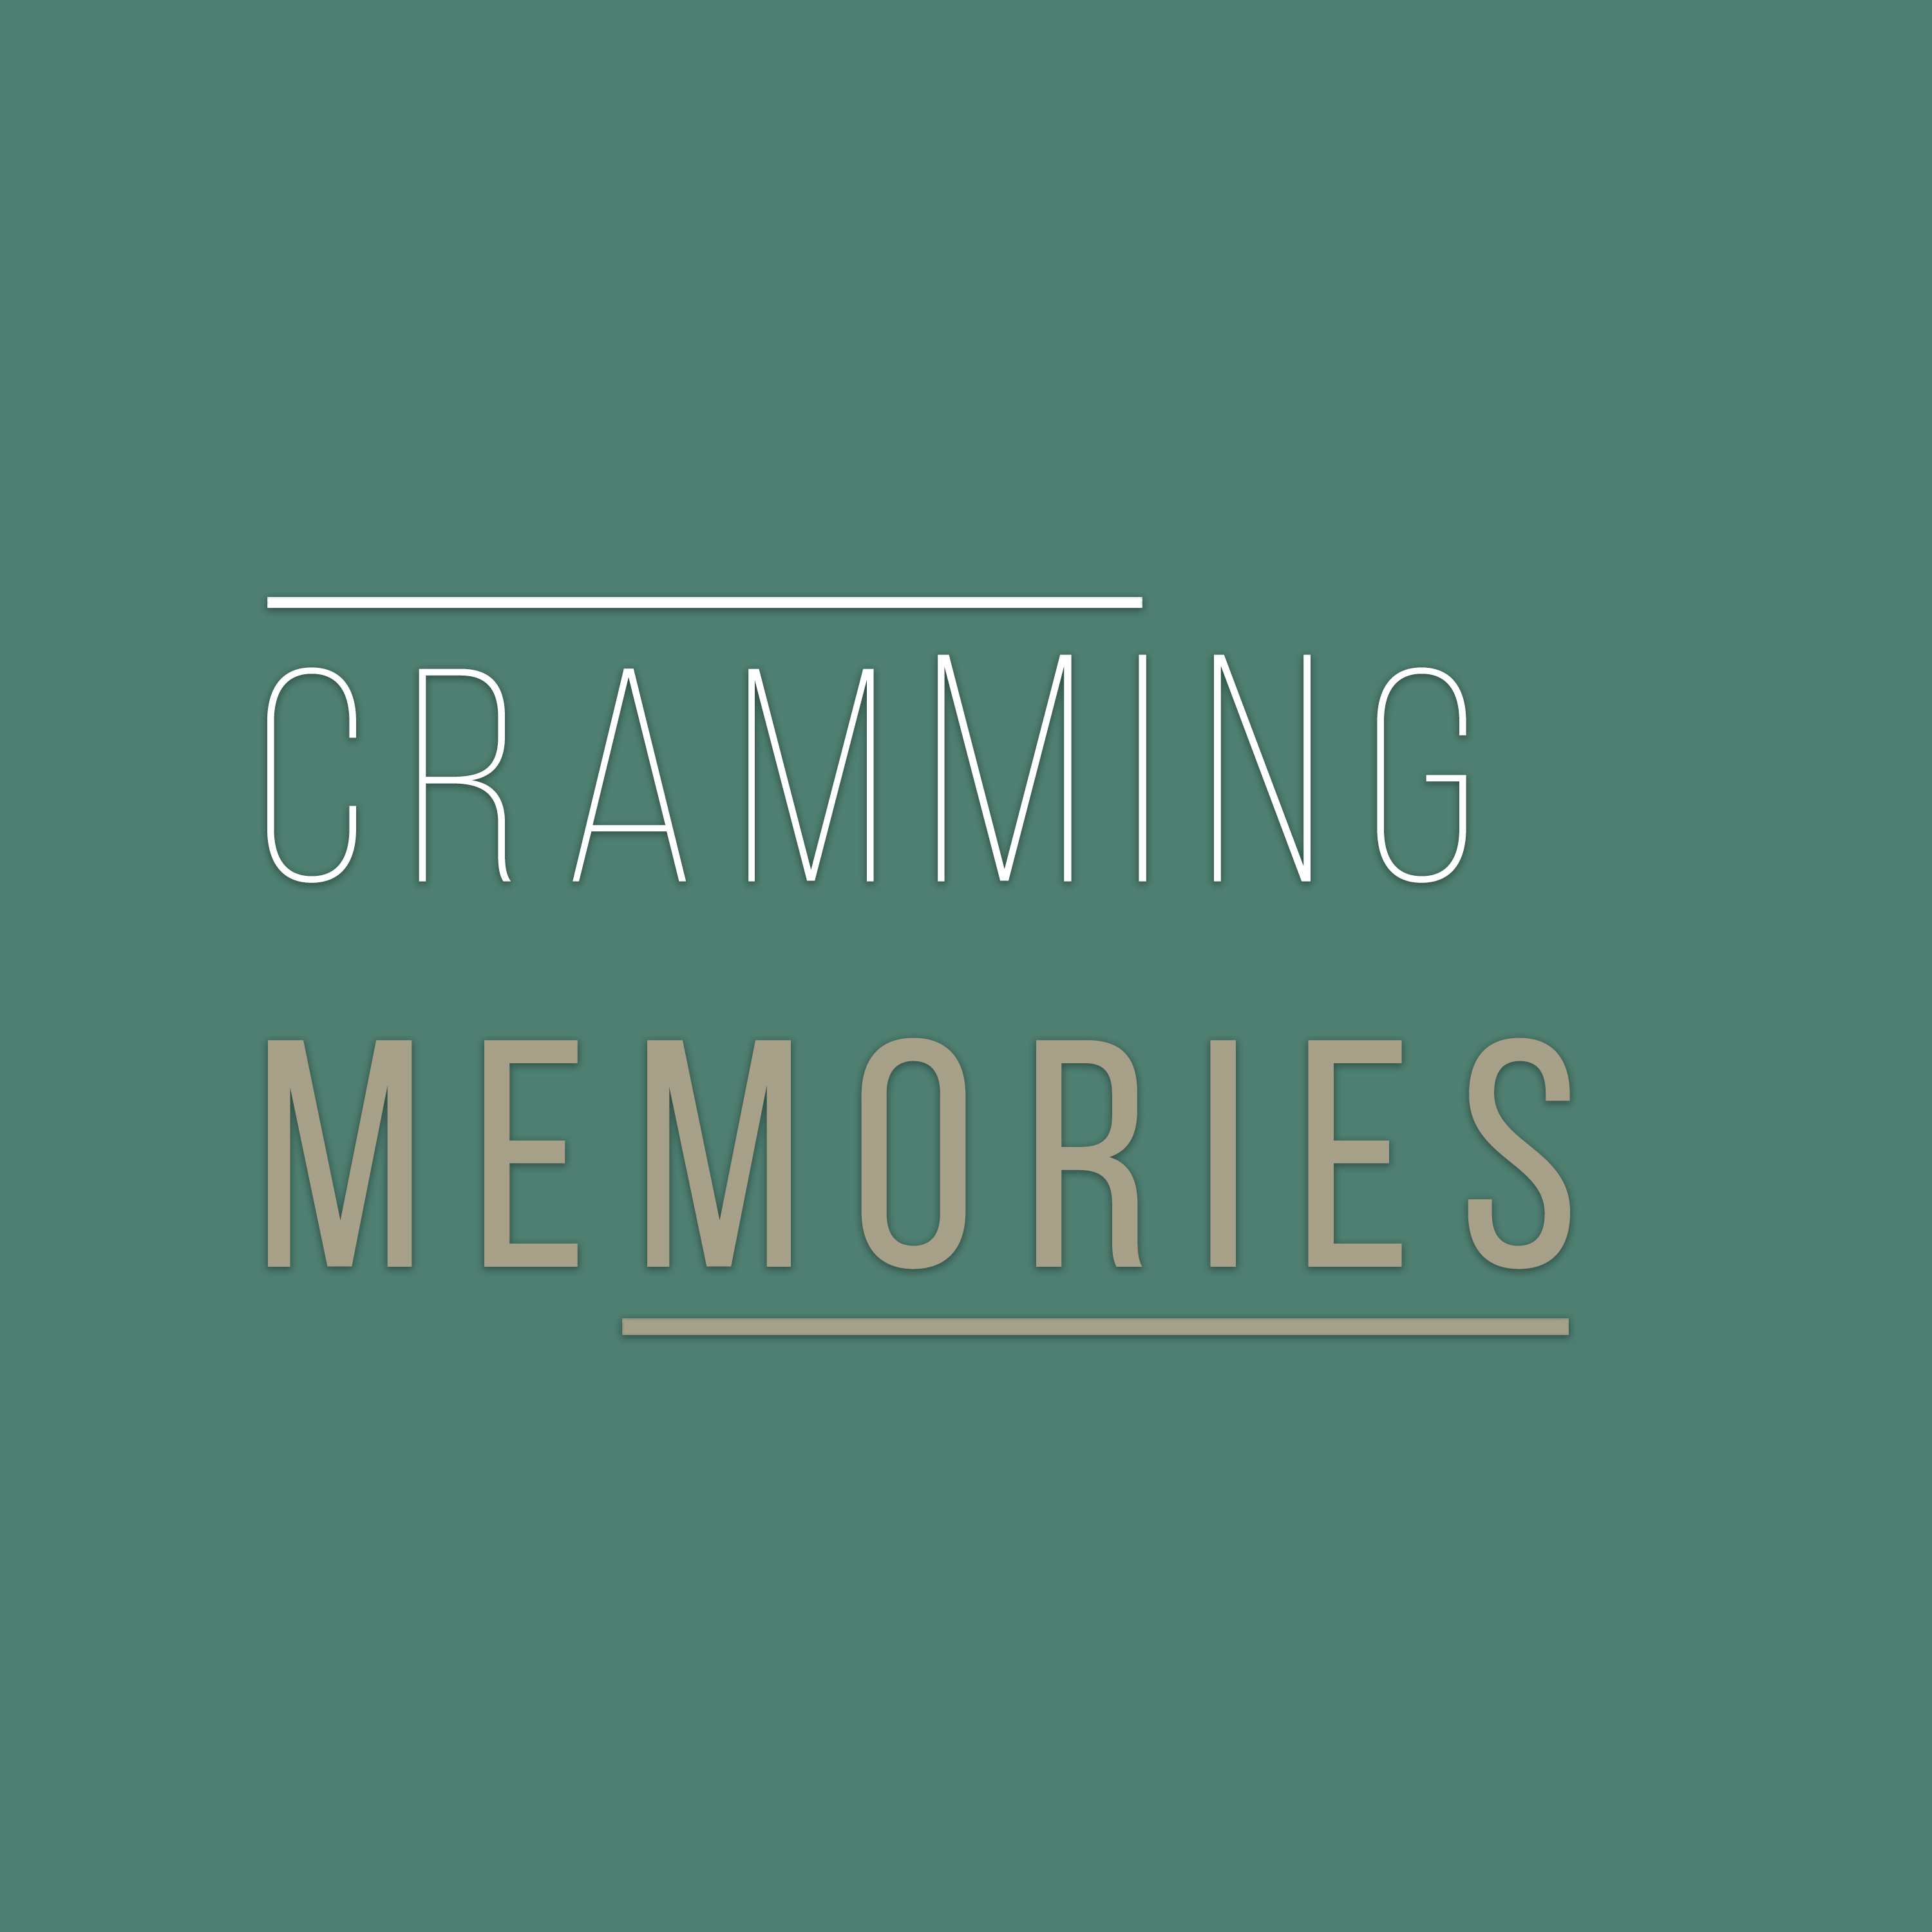 The Cramming Memories's Podcast